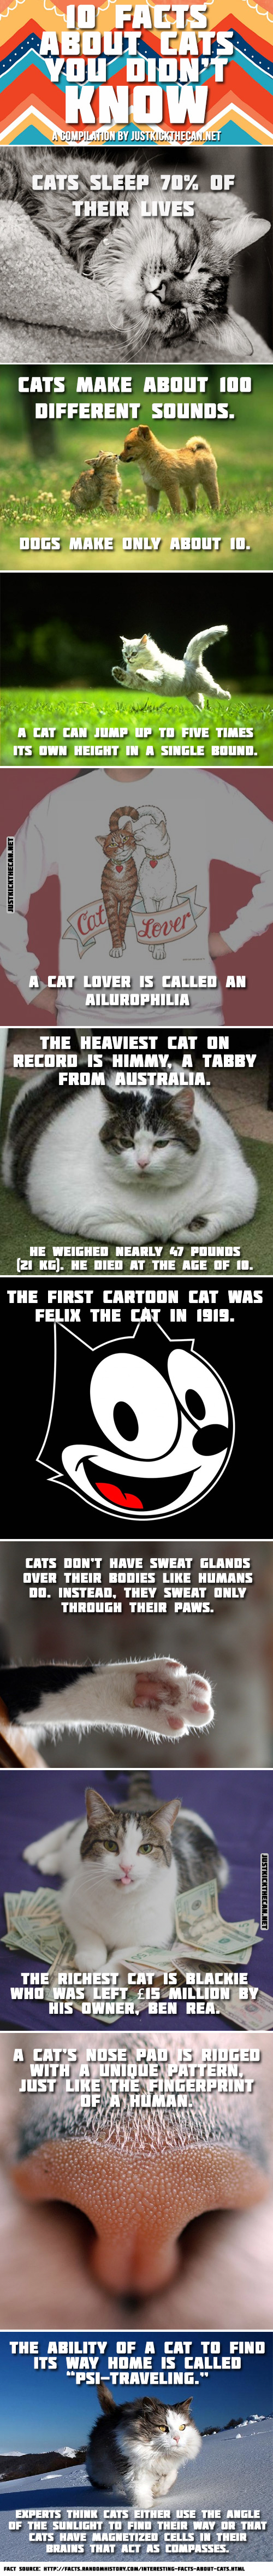 Cool facts about cats that you didn't know...